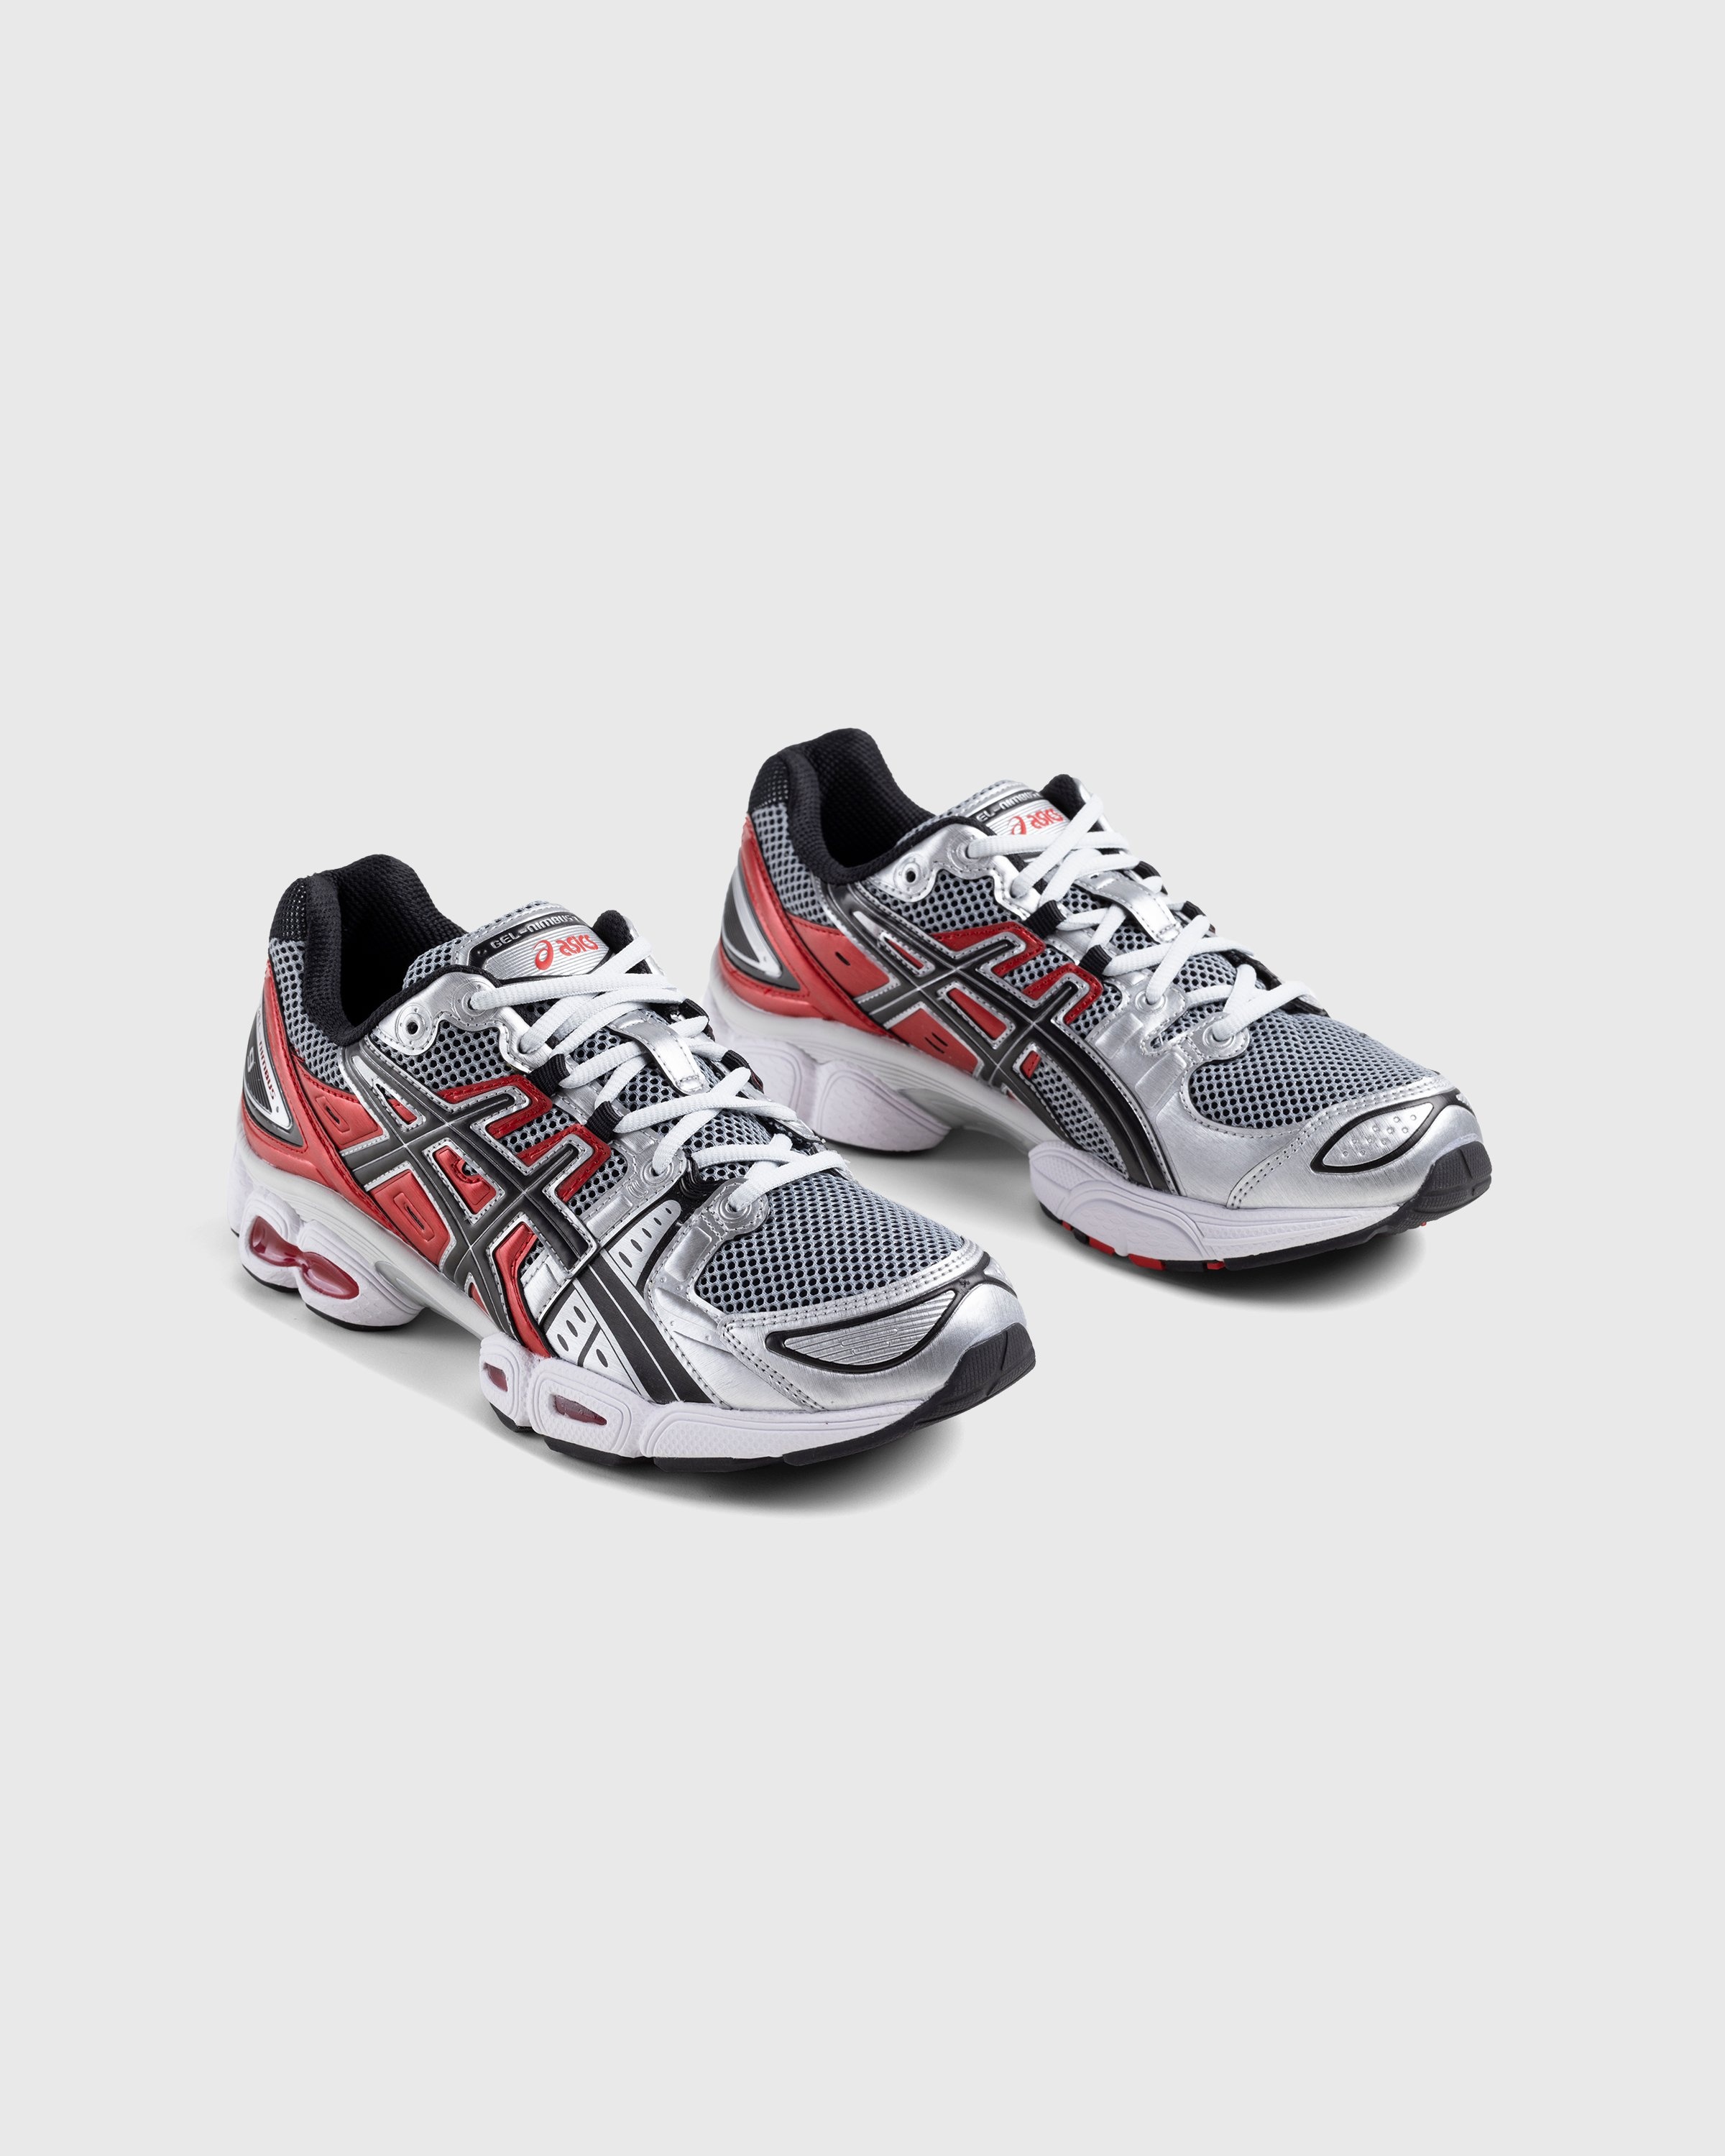 asics – Gel-Nimbus 9 Pure Silver/Classic Red - Sneakers - Red - Image 4